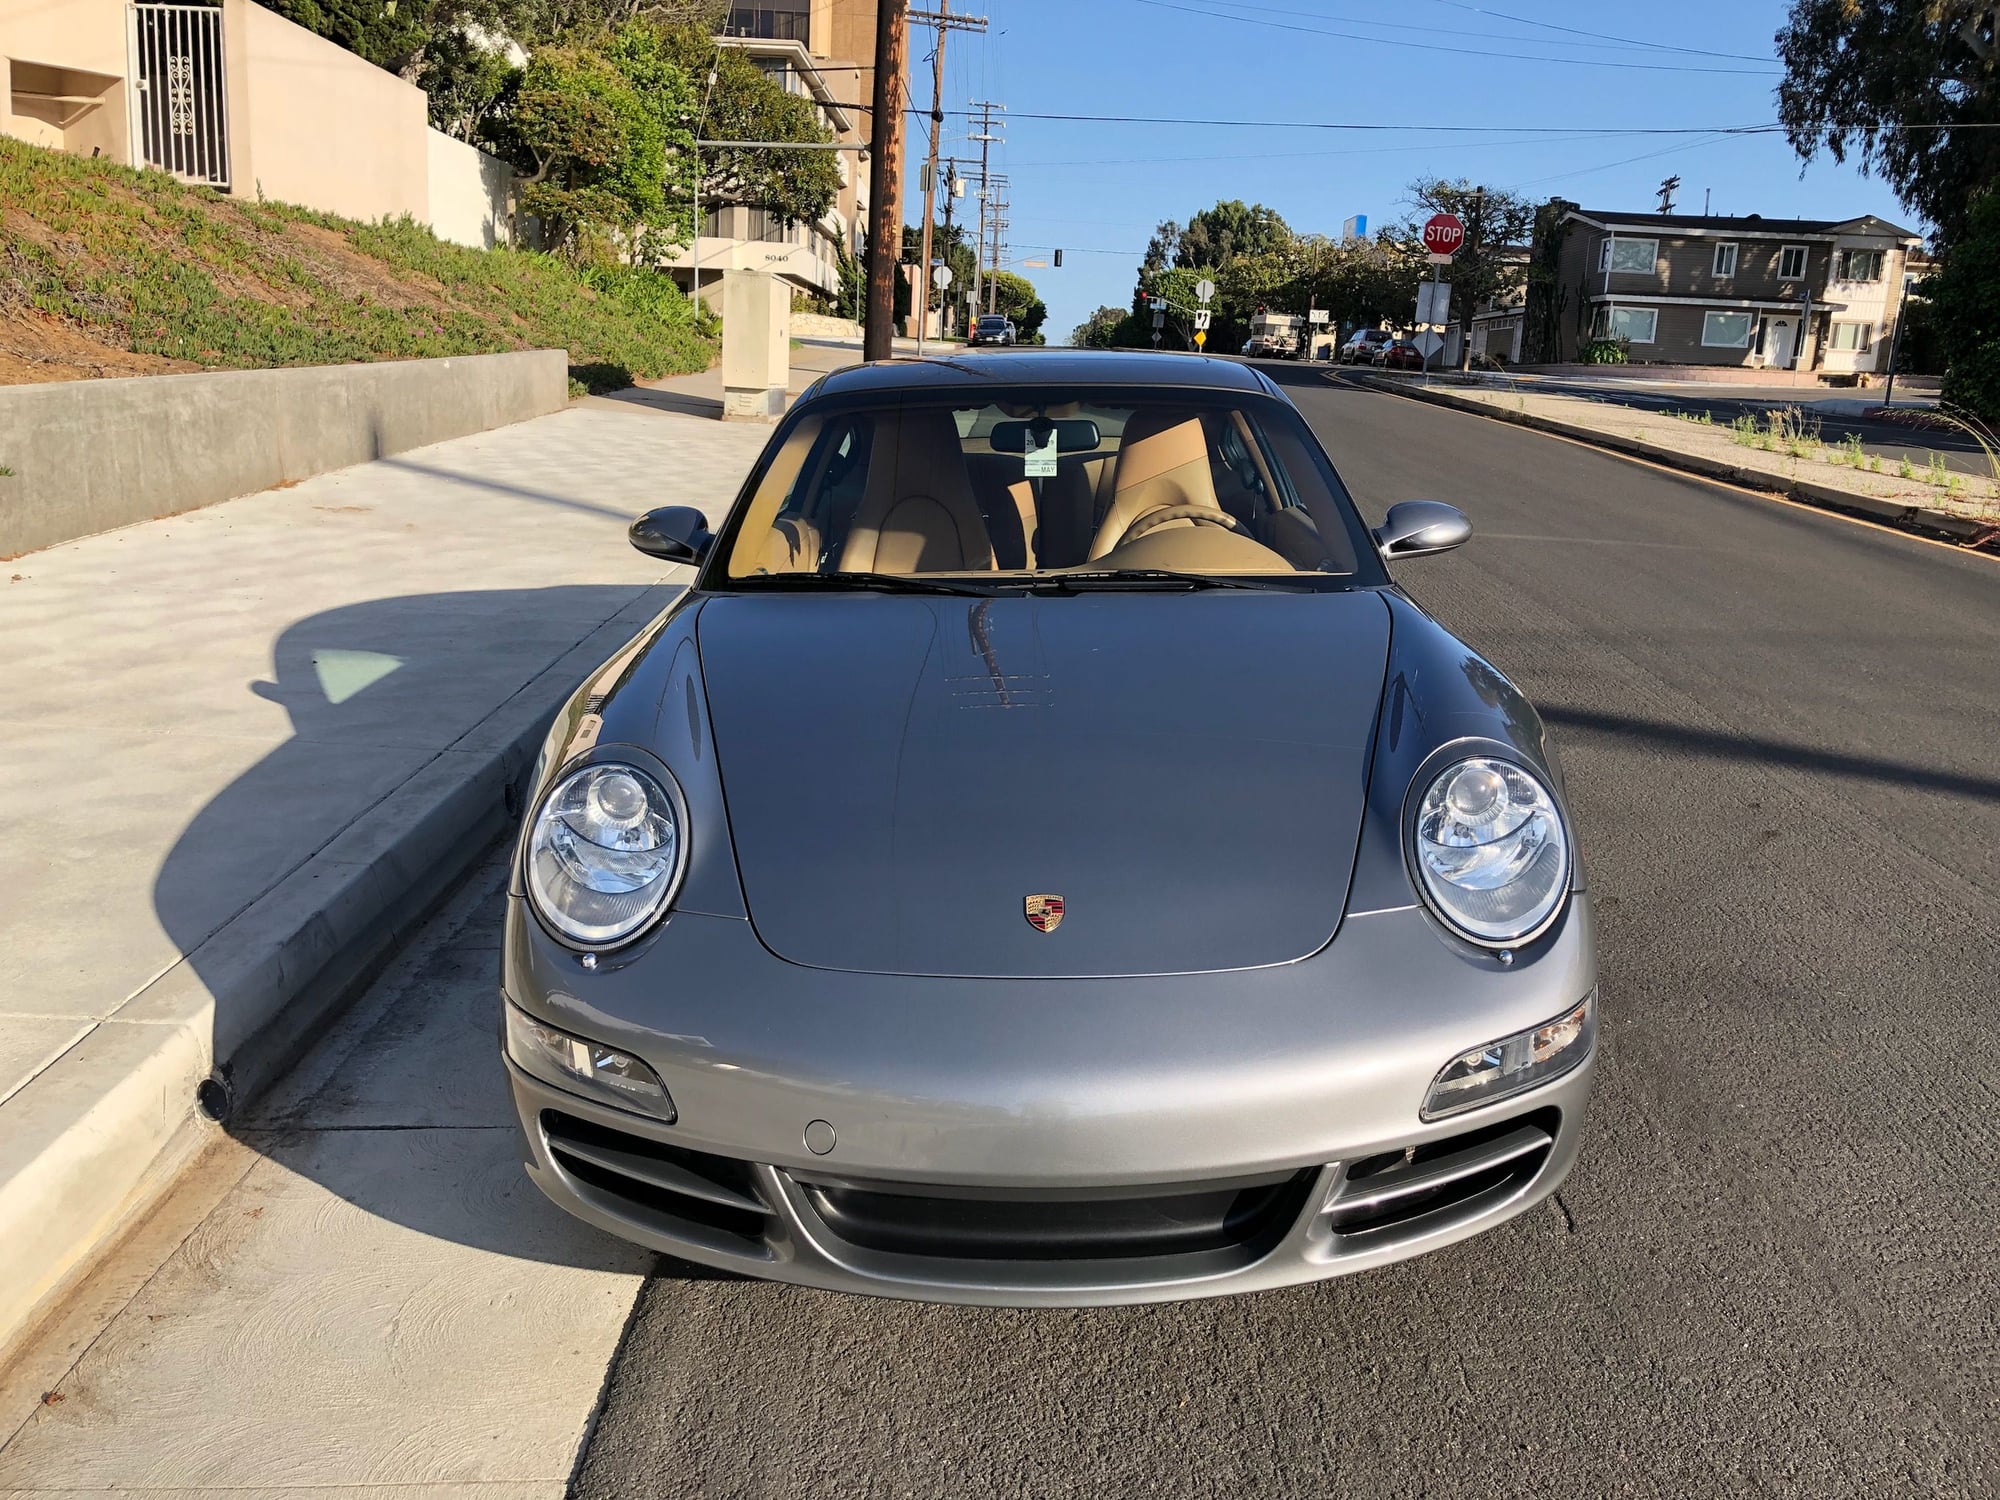 2005 Porsche 911 - 2005 Porsche 911 Carrera S, seal gray, sand beige, 41k miles, manual, new tires - Used - VIN WP0AB29965S742412 - 41,300 Miles - 6 cyl - 2WD - Manual - Coupe - Gray - Los Angeles, CA 90293, United States